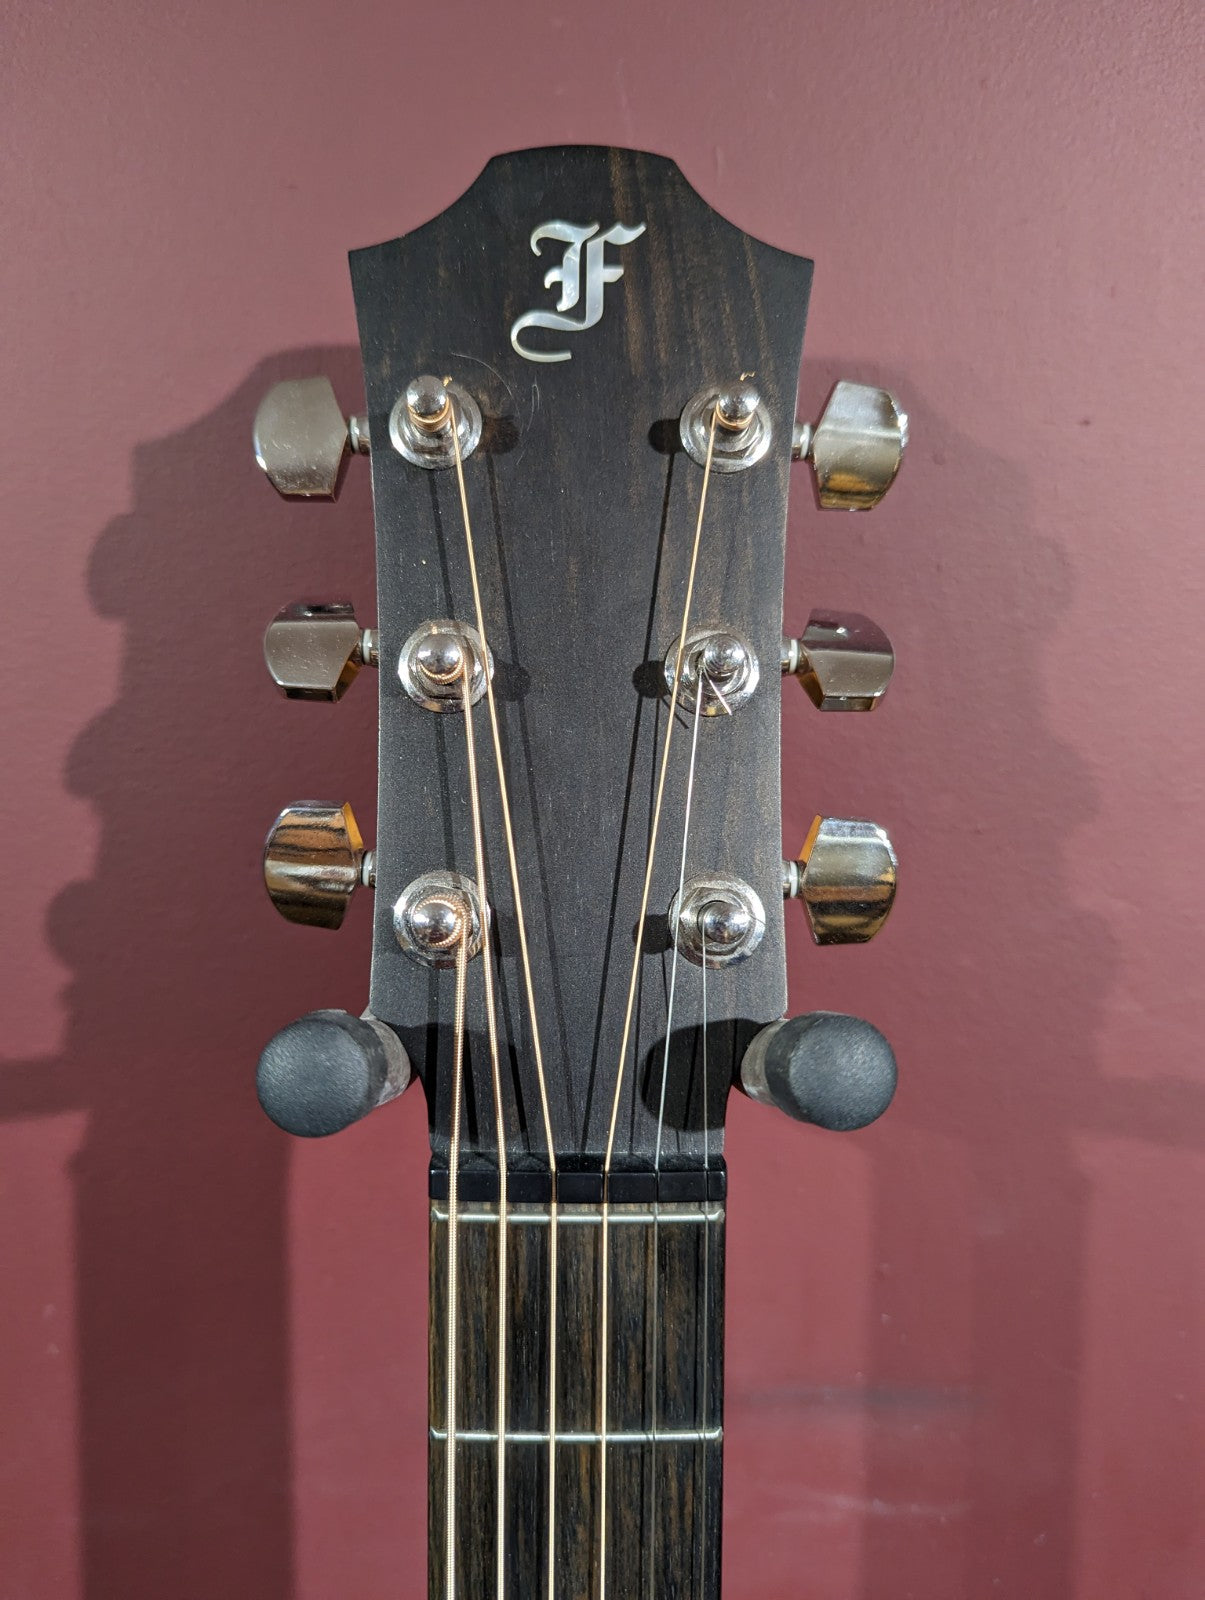 Furch G40 C/M (Used), Acoustic Guitar for sale at Richards Guitars.